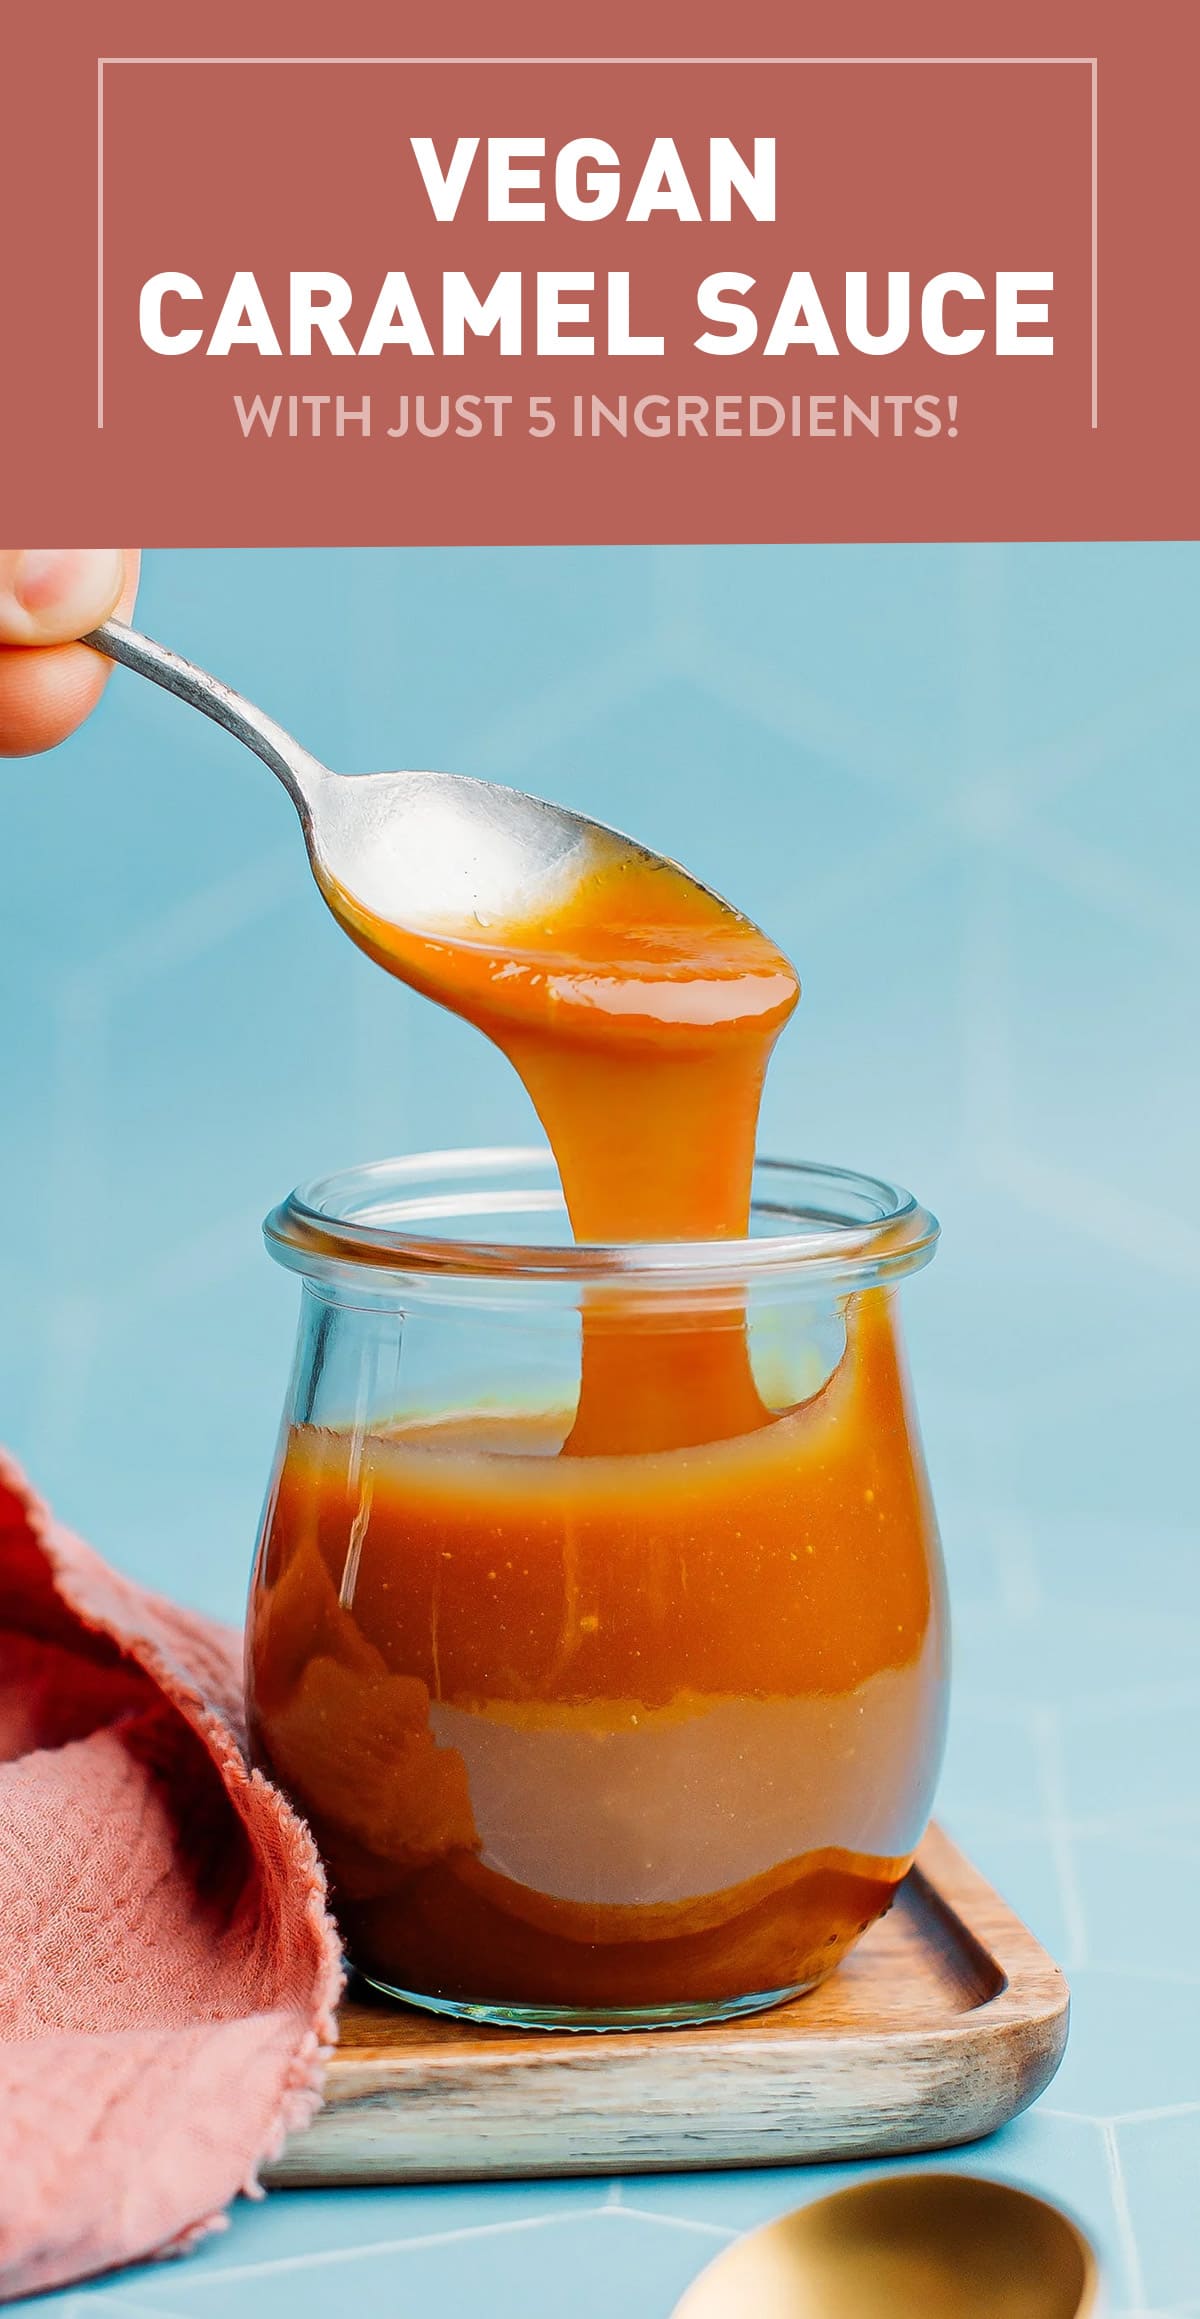 Learn how to make vegan salted caramel sauce at home, from scratch, with just 5 ingredients! Drizzle on pancakes, crêpes, ice cream, oatmeal, or stir in coffee, hot chocolate, or baked goods! It's smooth, rich, and so delicious! #caramel #vegan